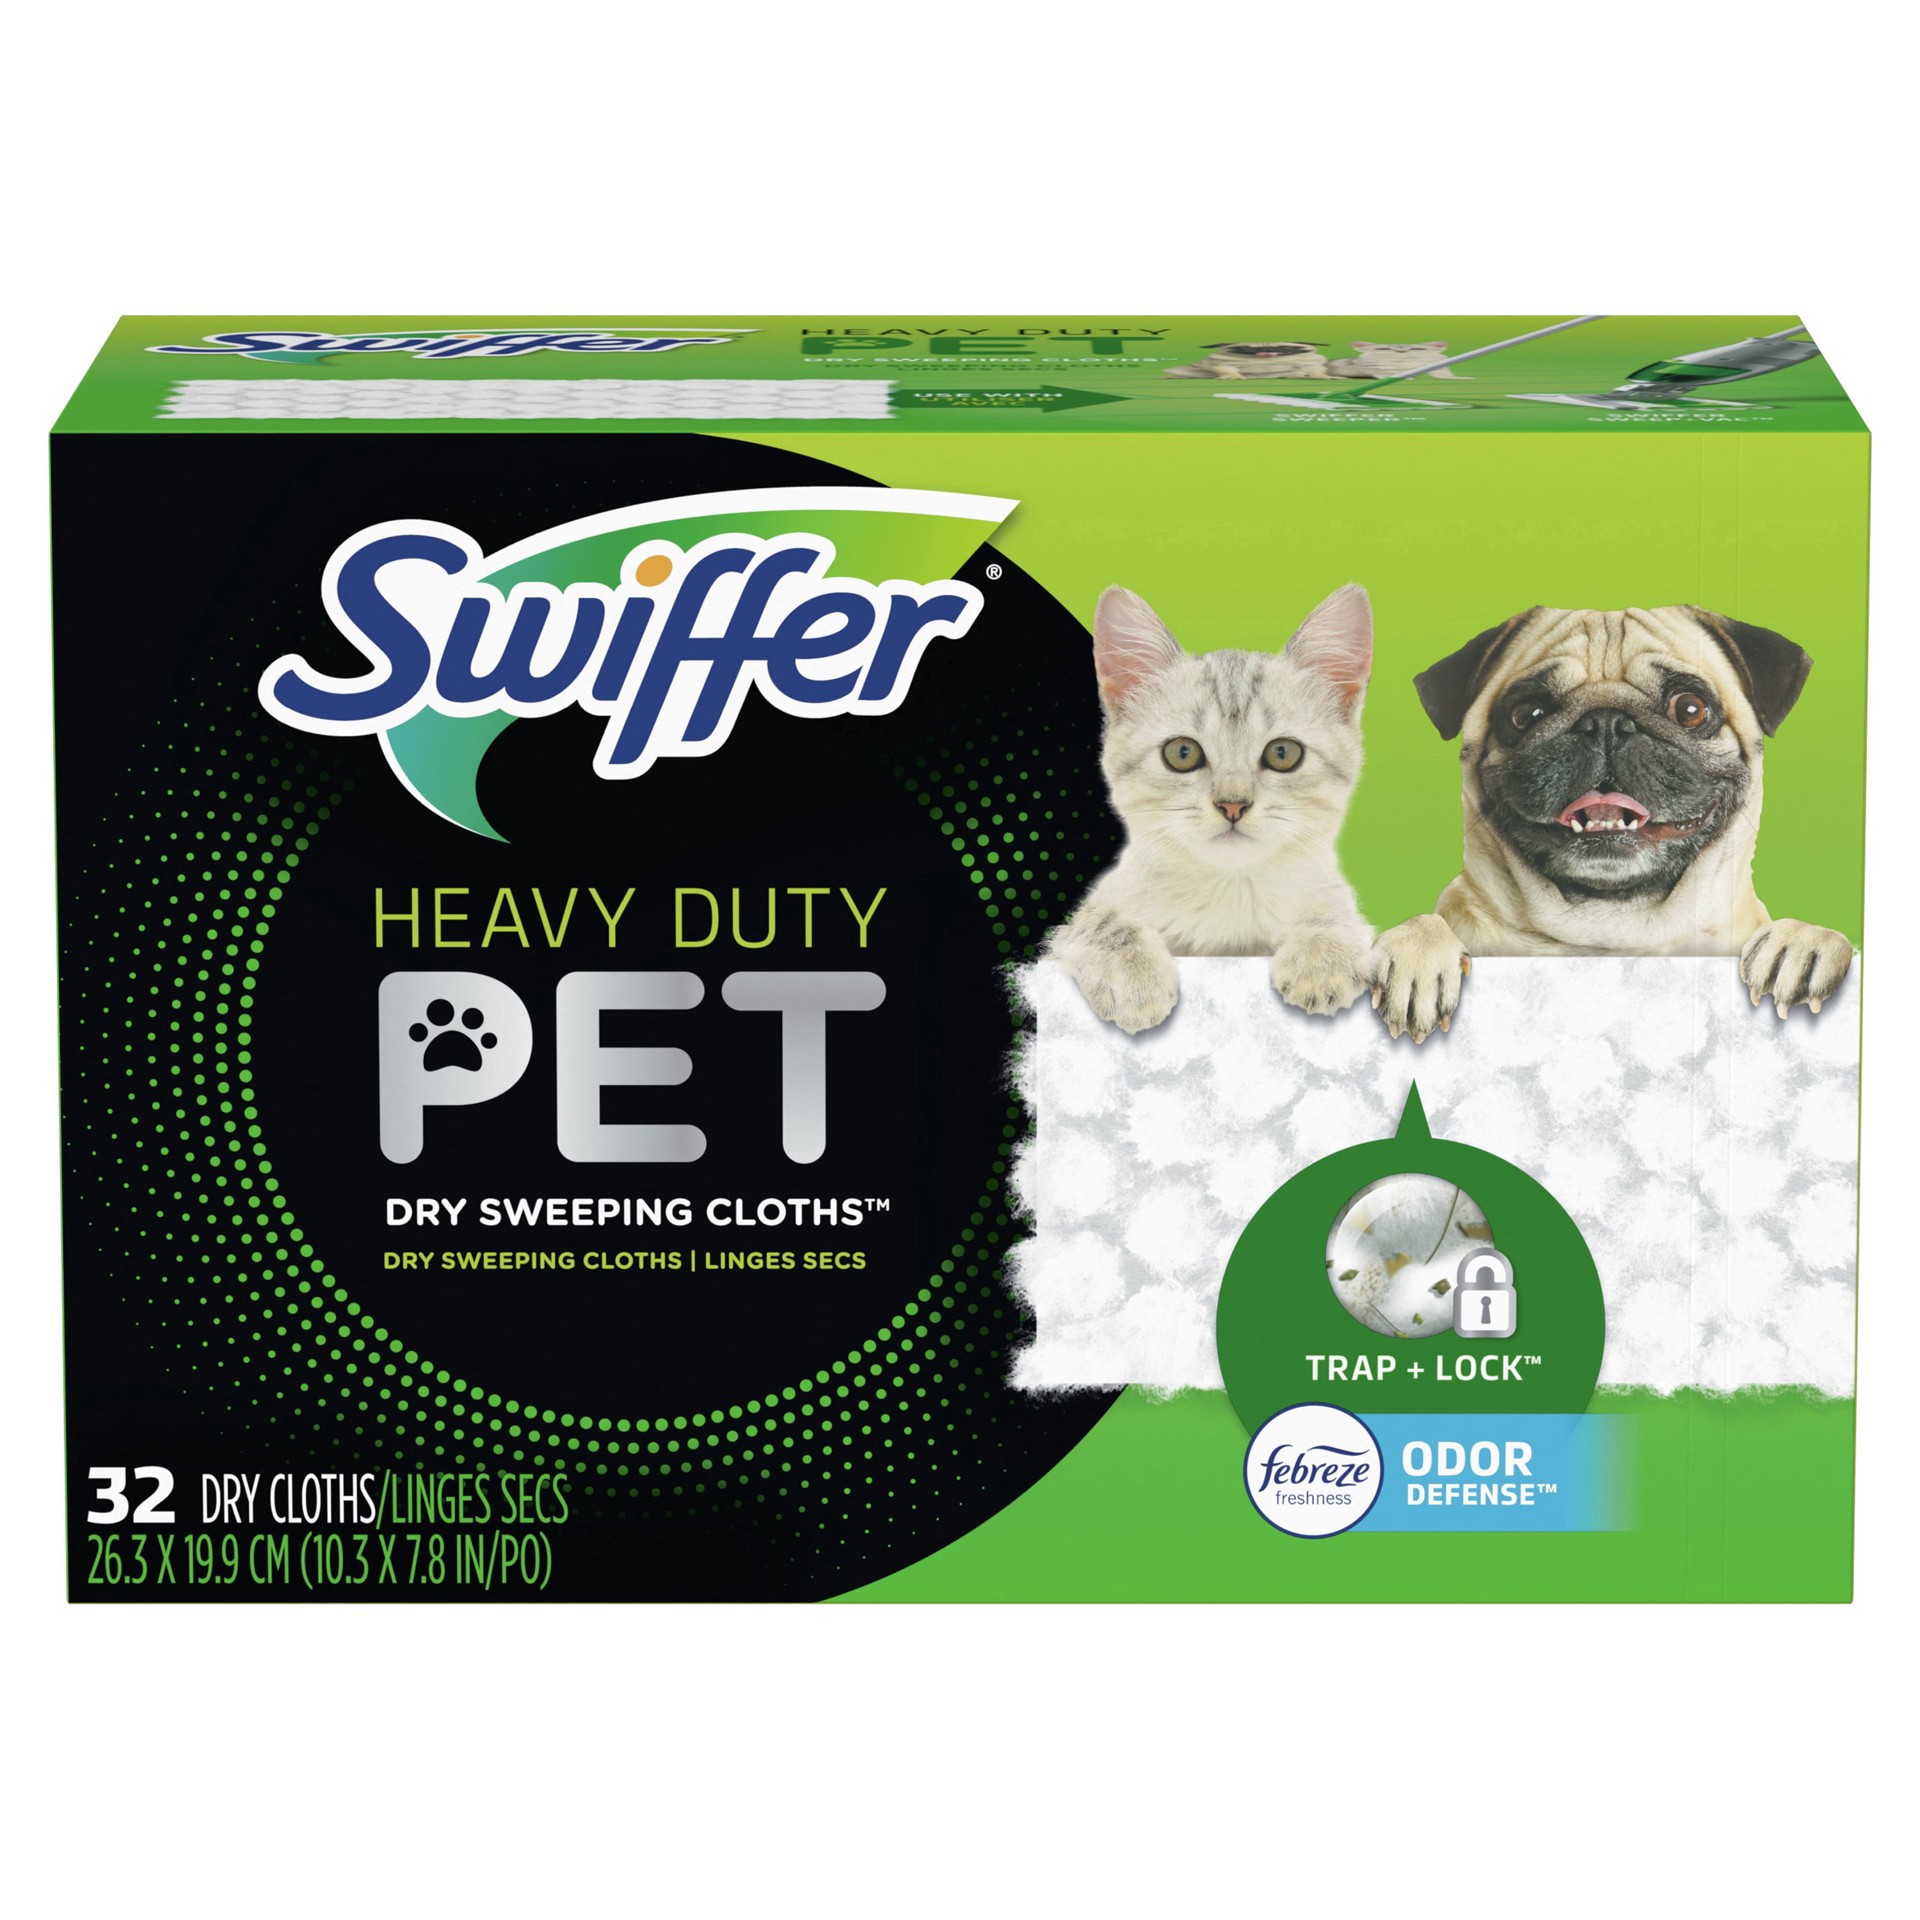 slide 15 of 16, Swiffer Sweeper Pet Heavy Duty Multi-Surface Dry Cloth Refills for Floor Sweeping and Cleaning - 32ct, 32 ct